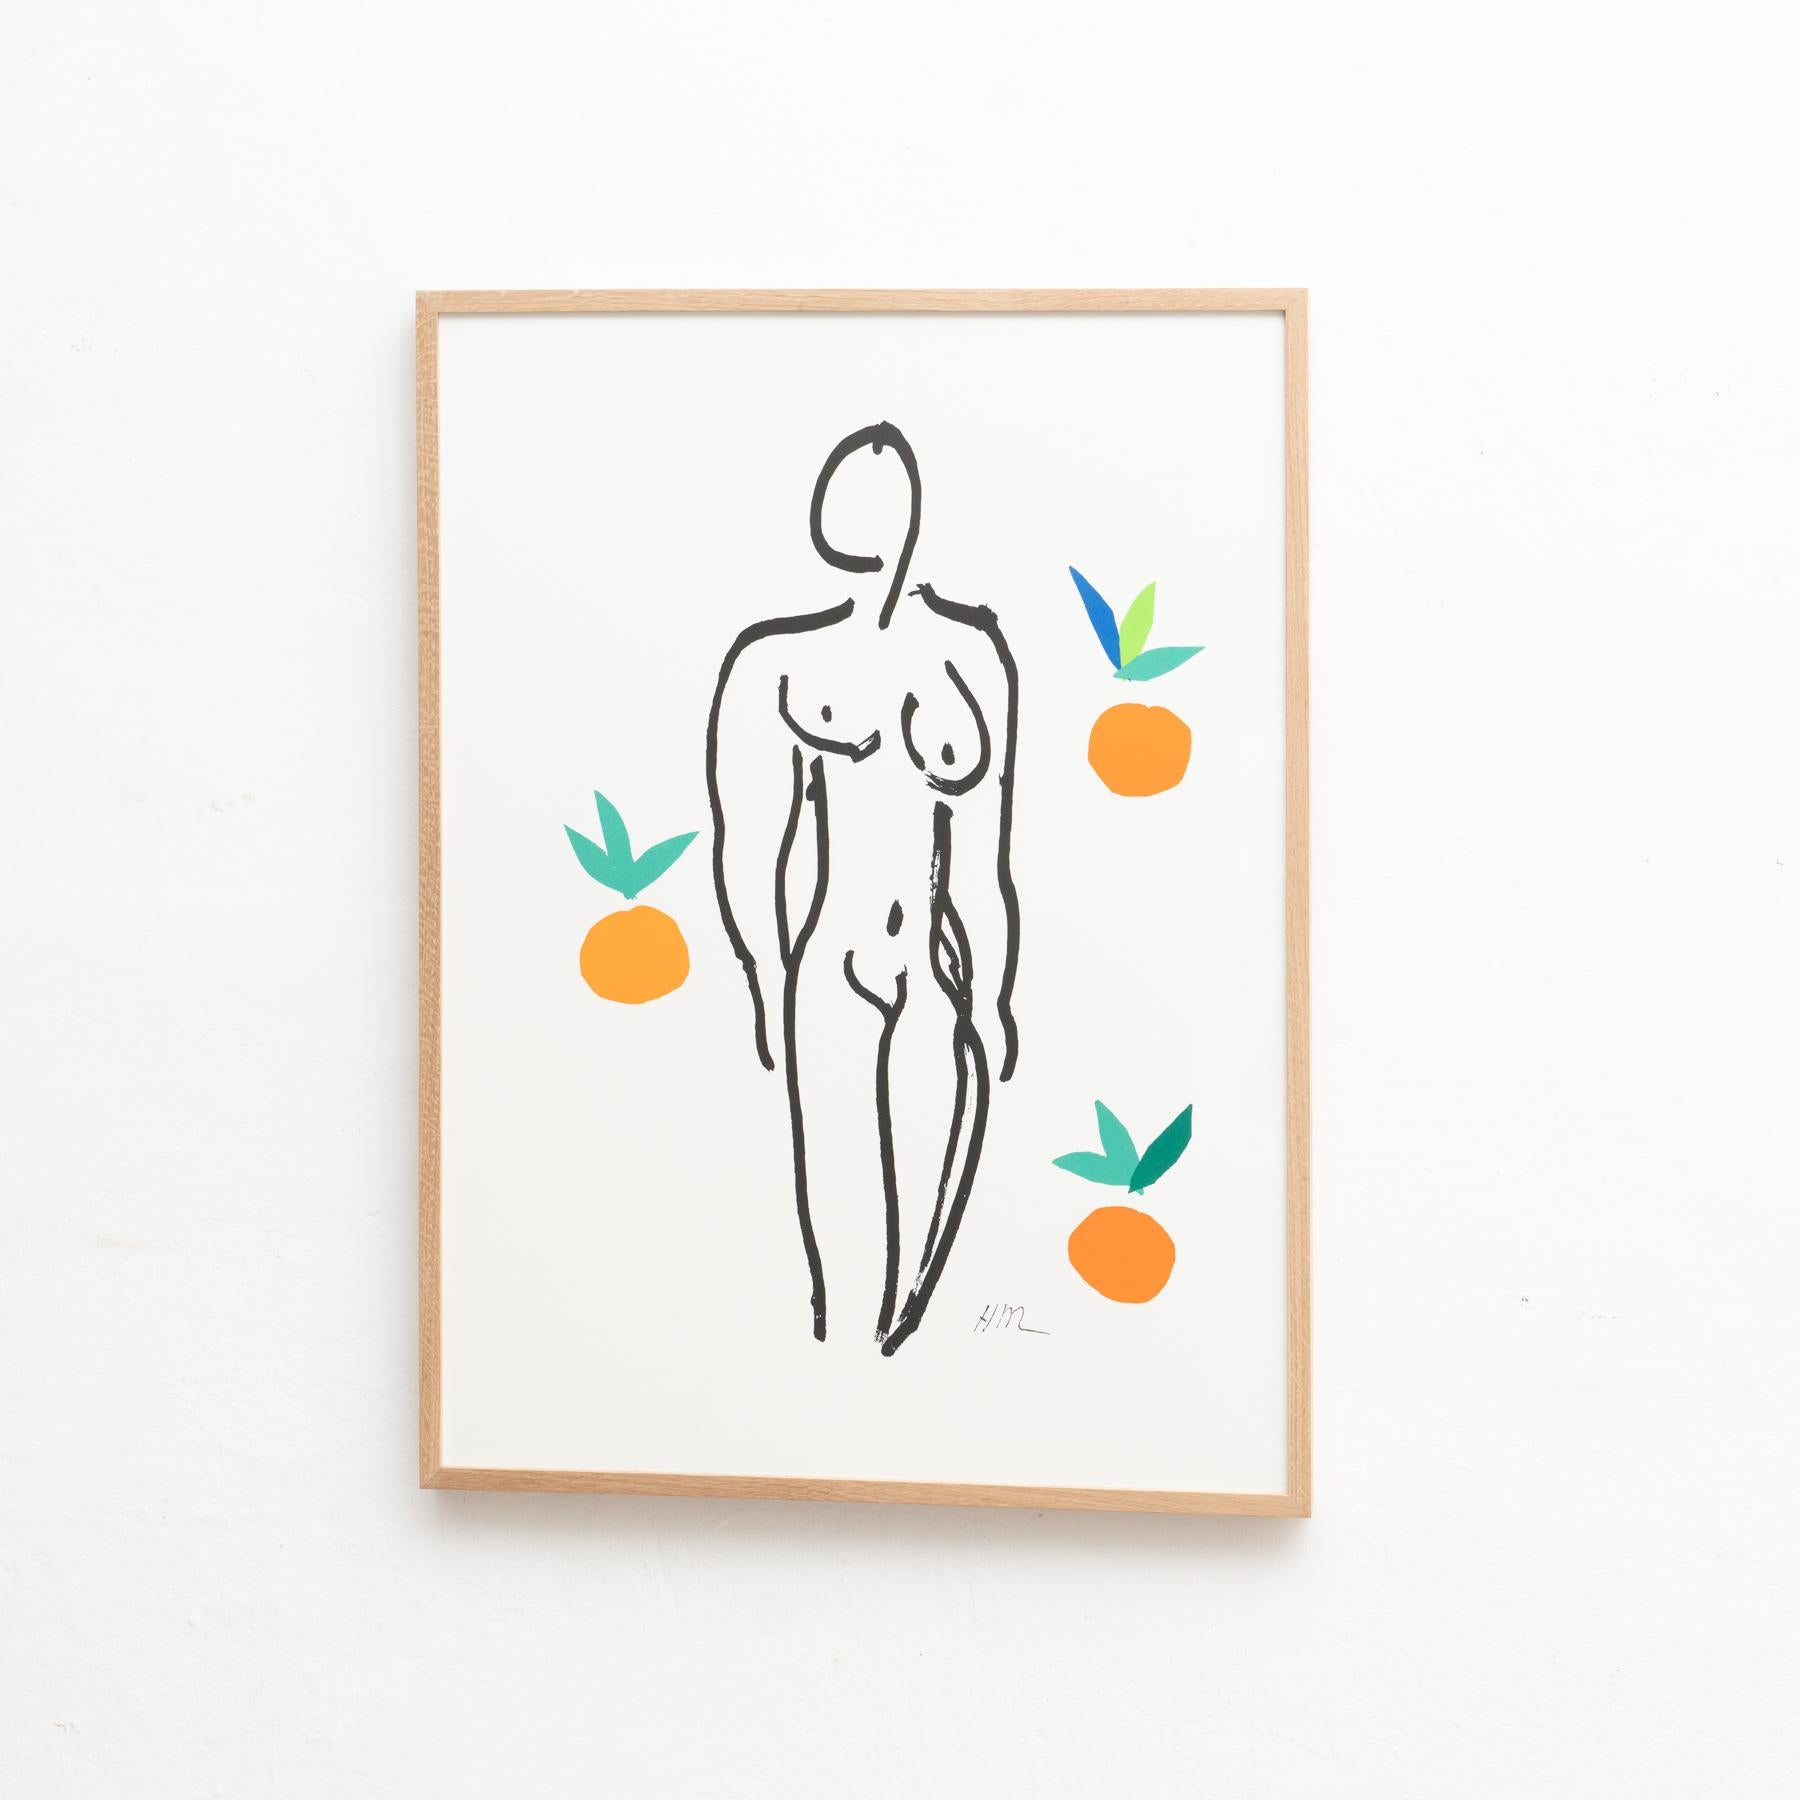 Color lithograph 'Nu Aux Oranges' after the work by Henri Matisse, plate-signed by Matisse

Framed and signed in the stone, as issued

Henri Matisse whether working as a draftsman, a sculptor, a printmaker or a painter Henri Matisse was a master